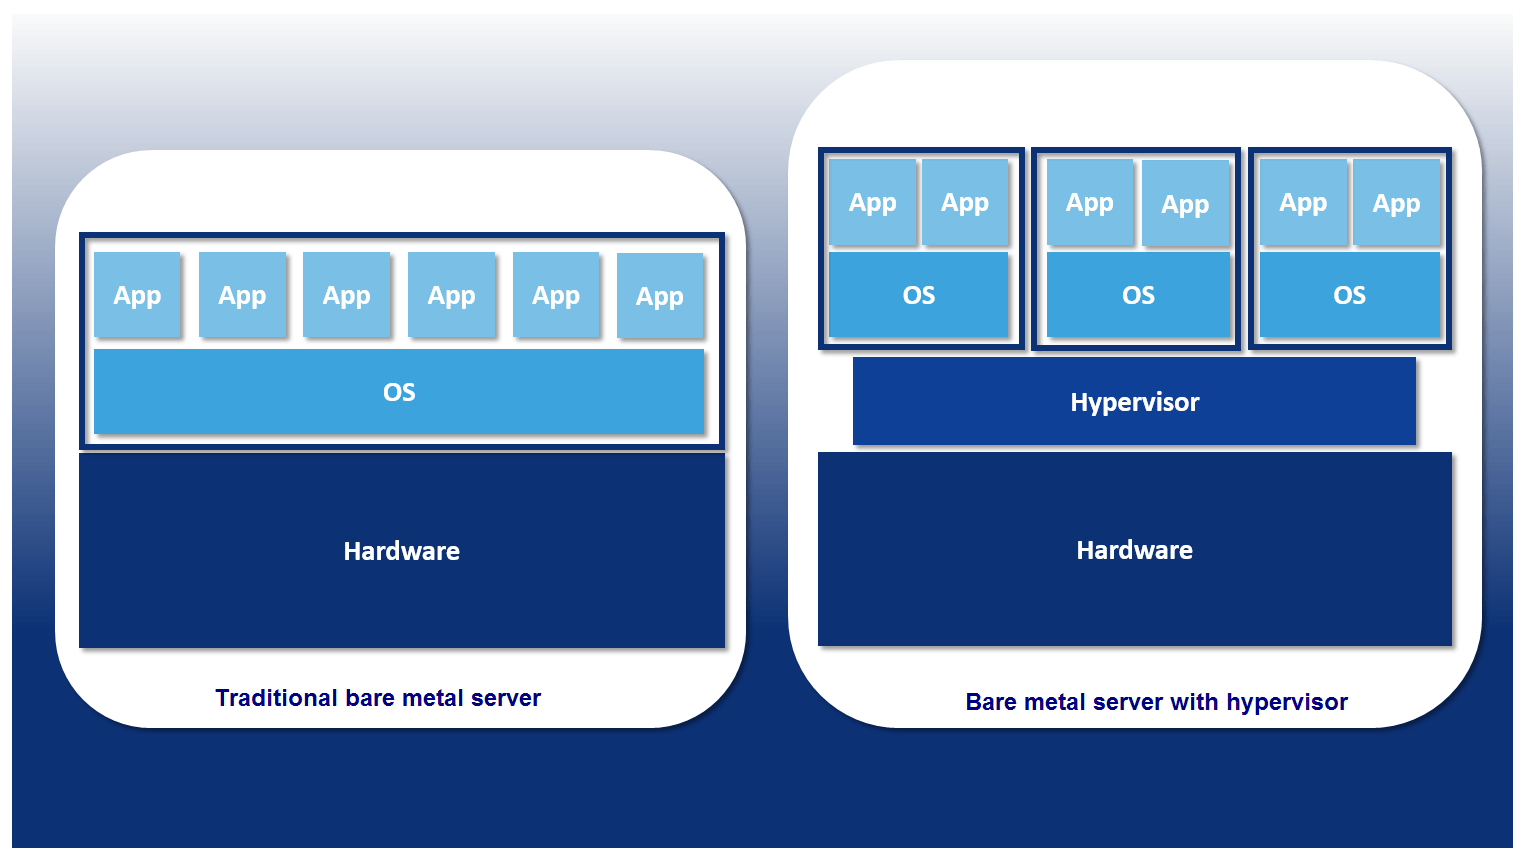 Schematic representation of a bare metal server, with and without a hypervisor